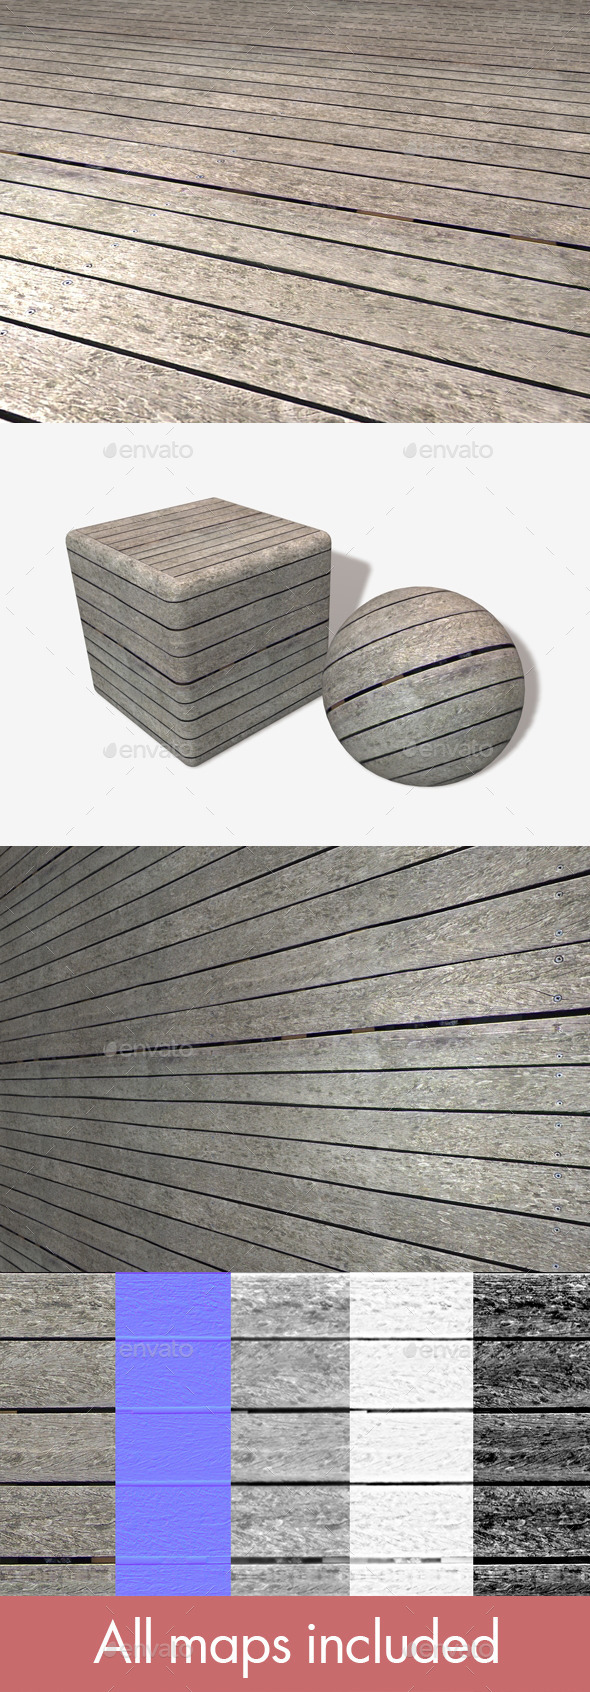 Weathered Wooden Planks - 3Docean 11494910